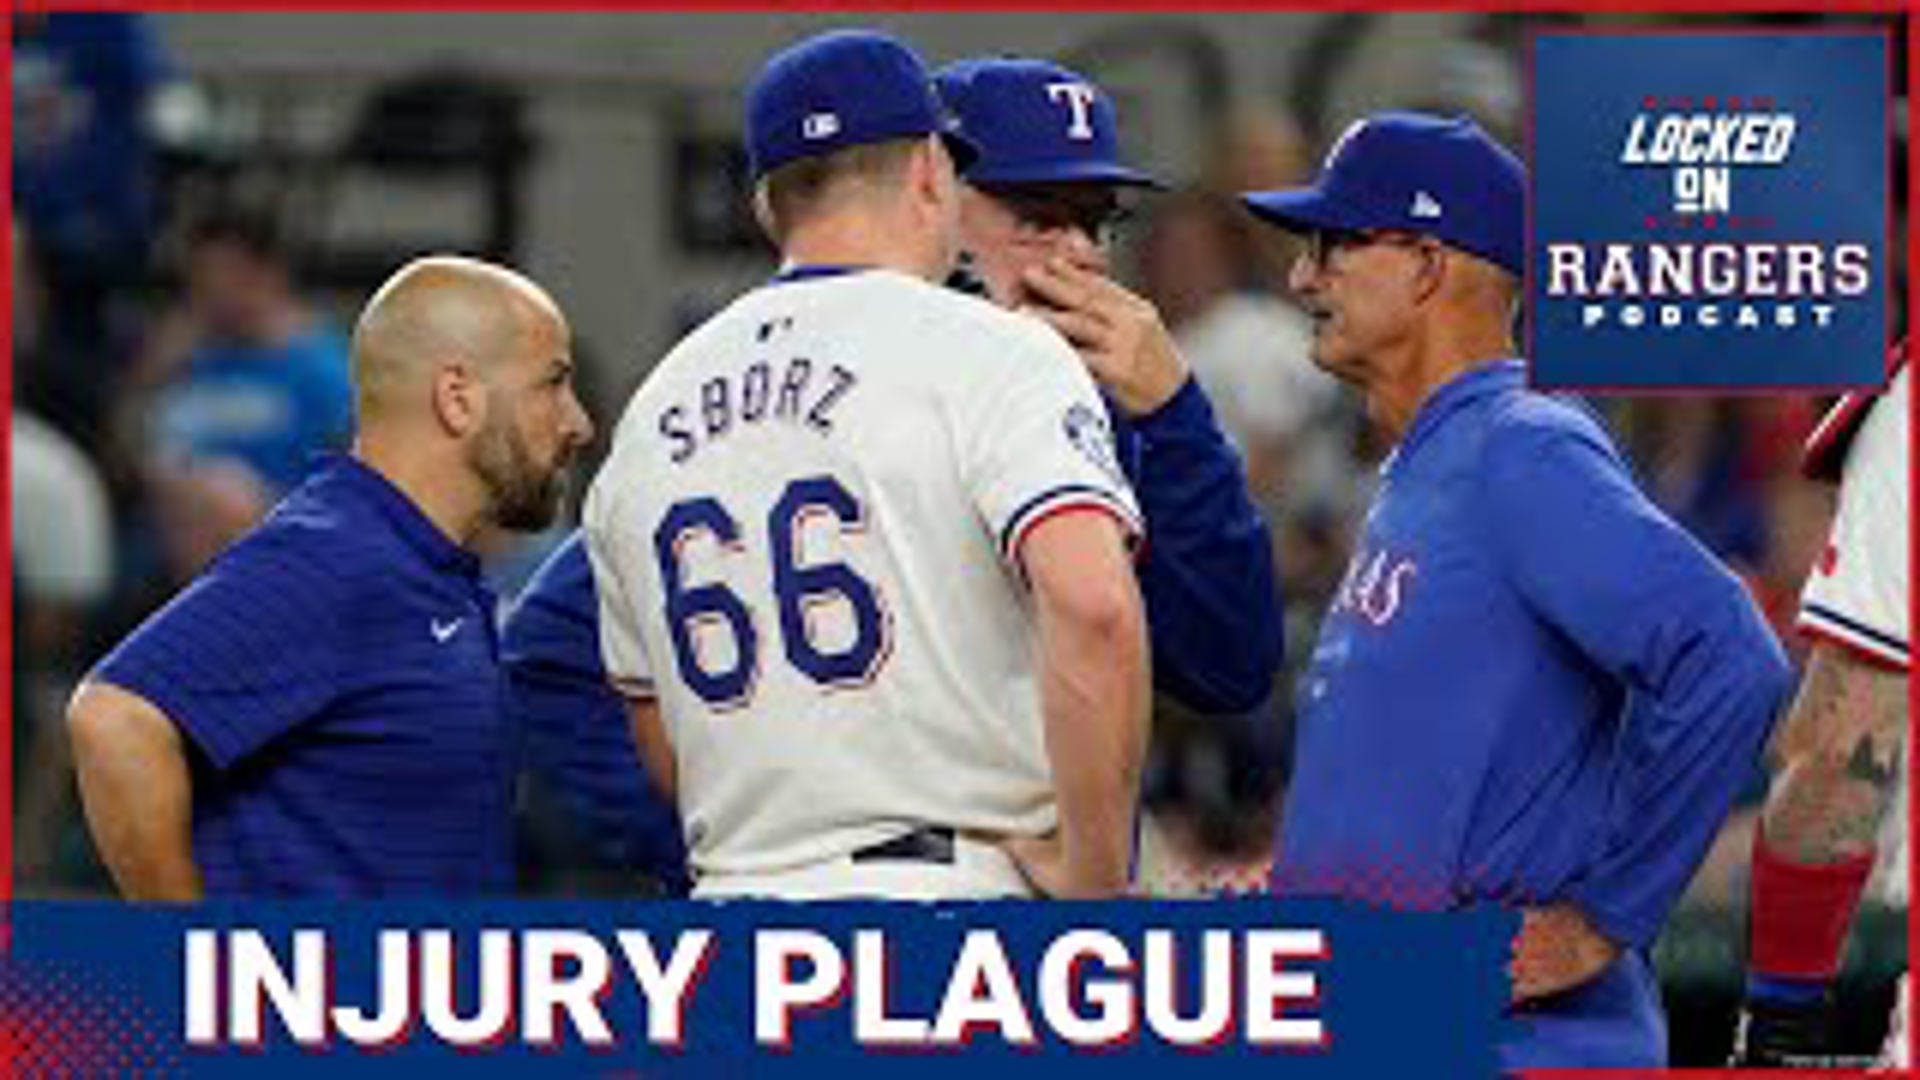 The Texas Rangers placed Josh Sborz on the injured list for the second time this season. Sborz is the tenth pitcher on the Rangers' injured list at the moment.